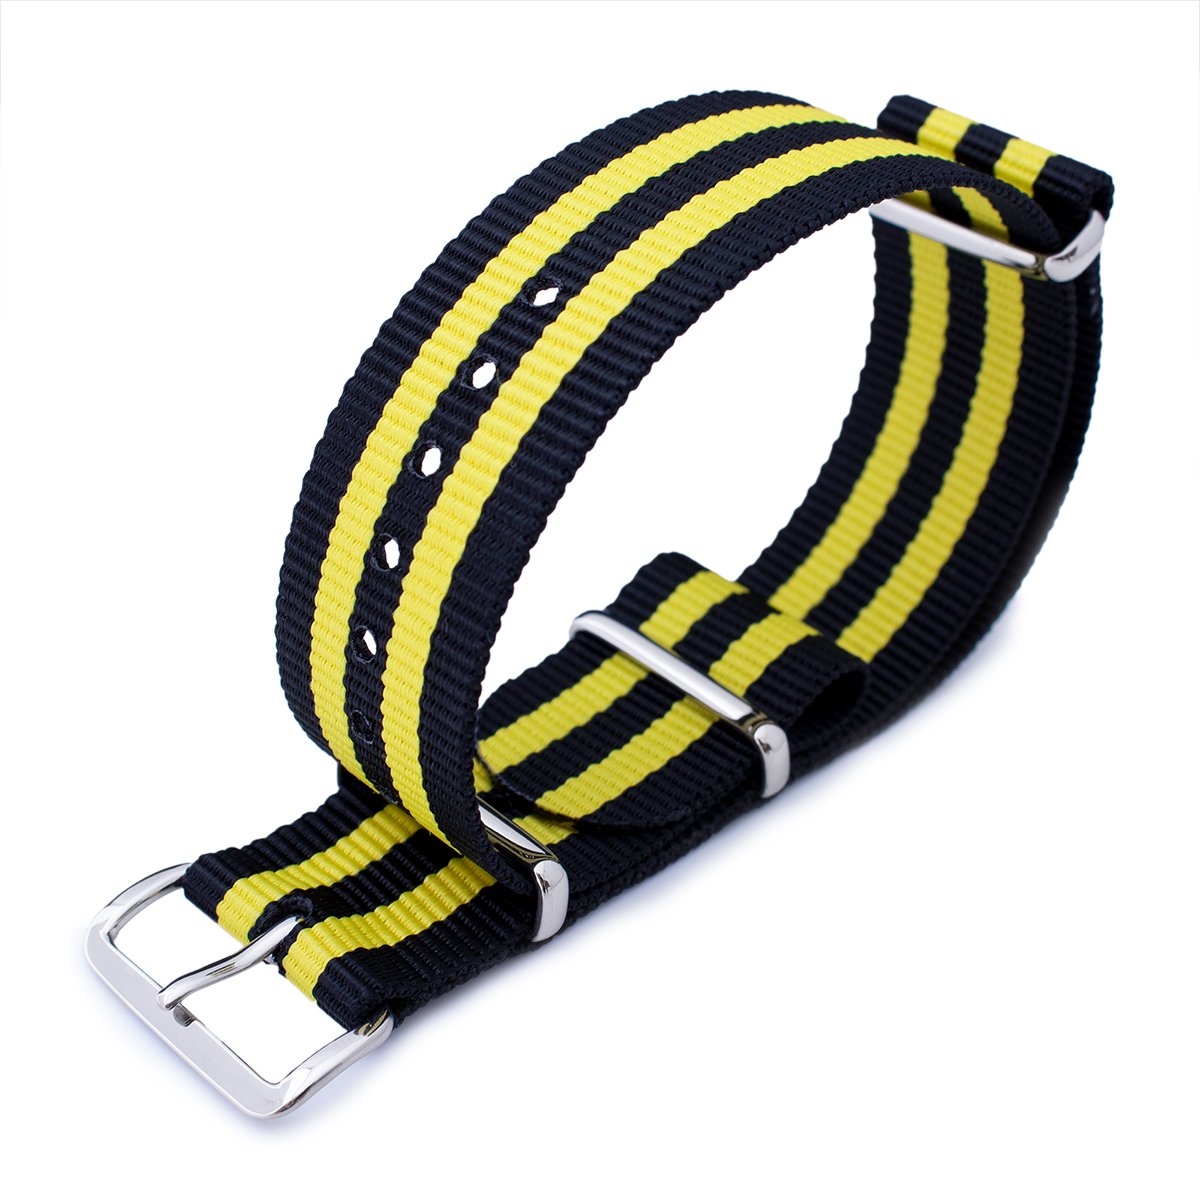 MiLTAT 20mm or 22mm G10 military watch strap ballistic nylon armband Polished Black &amp; Yellow Strapcode Watch Bands